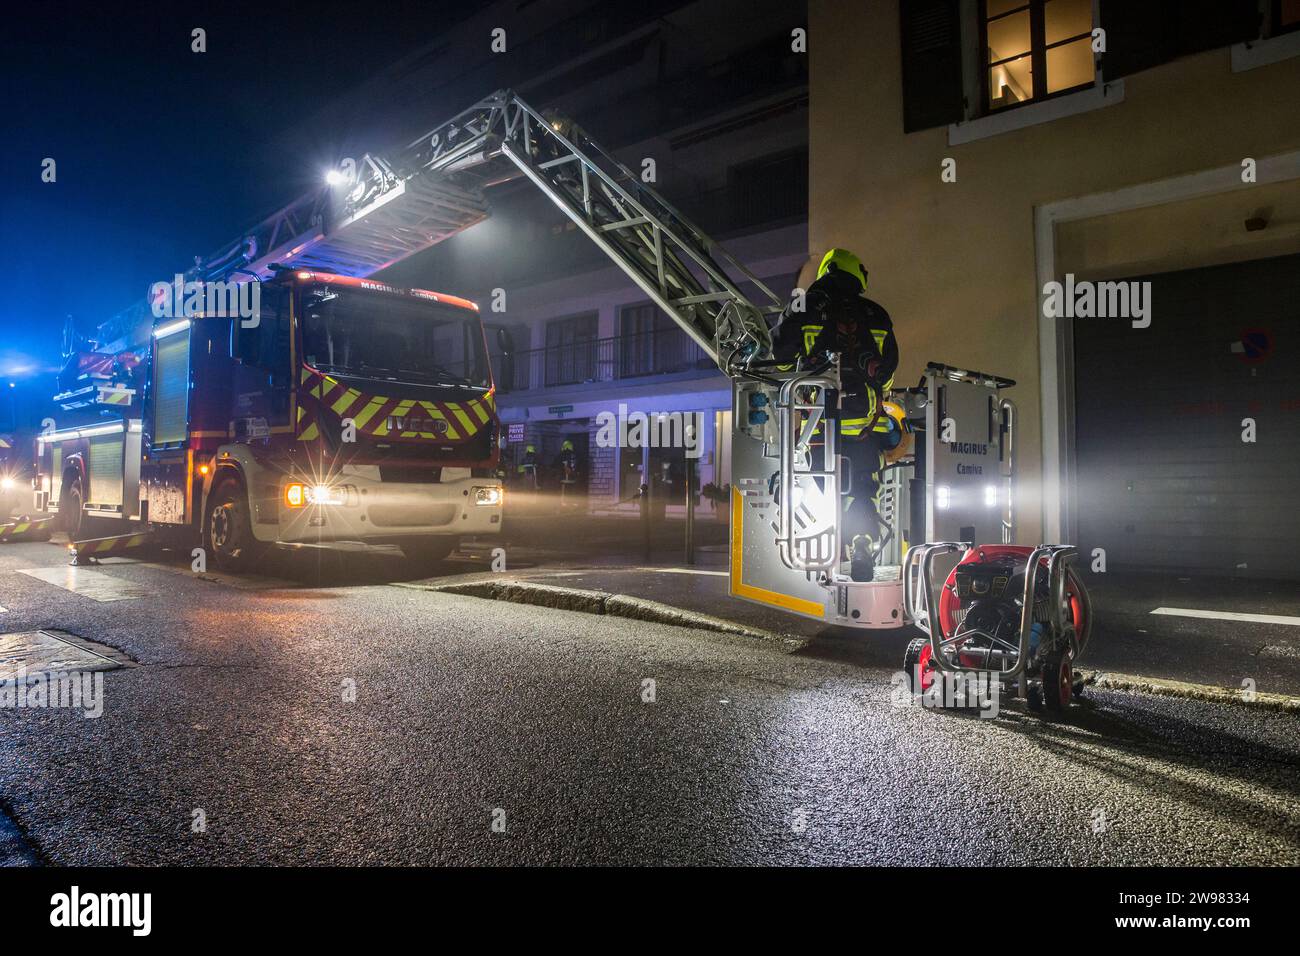 Firefighters loading up big ventilation fan to increase visibility during active fire situation in building at night, Annecy, Haute-Savoie, France Stock Photo